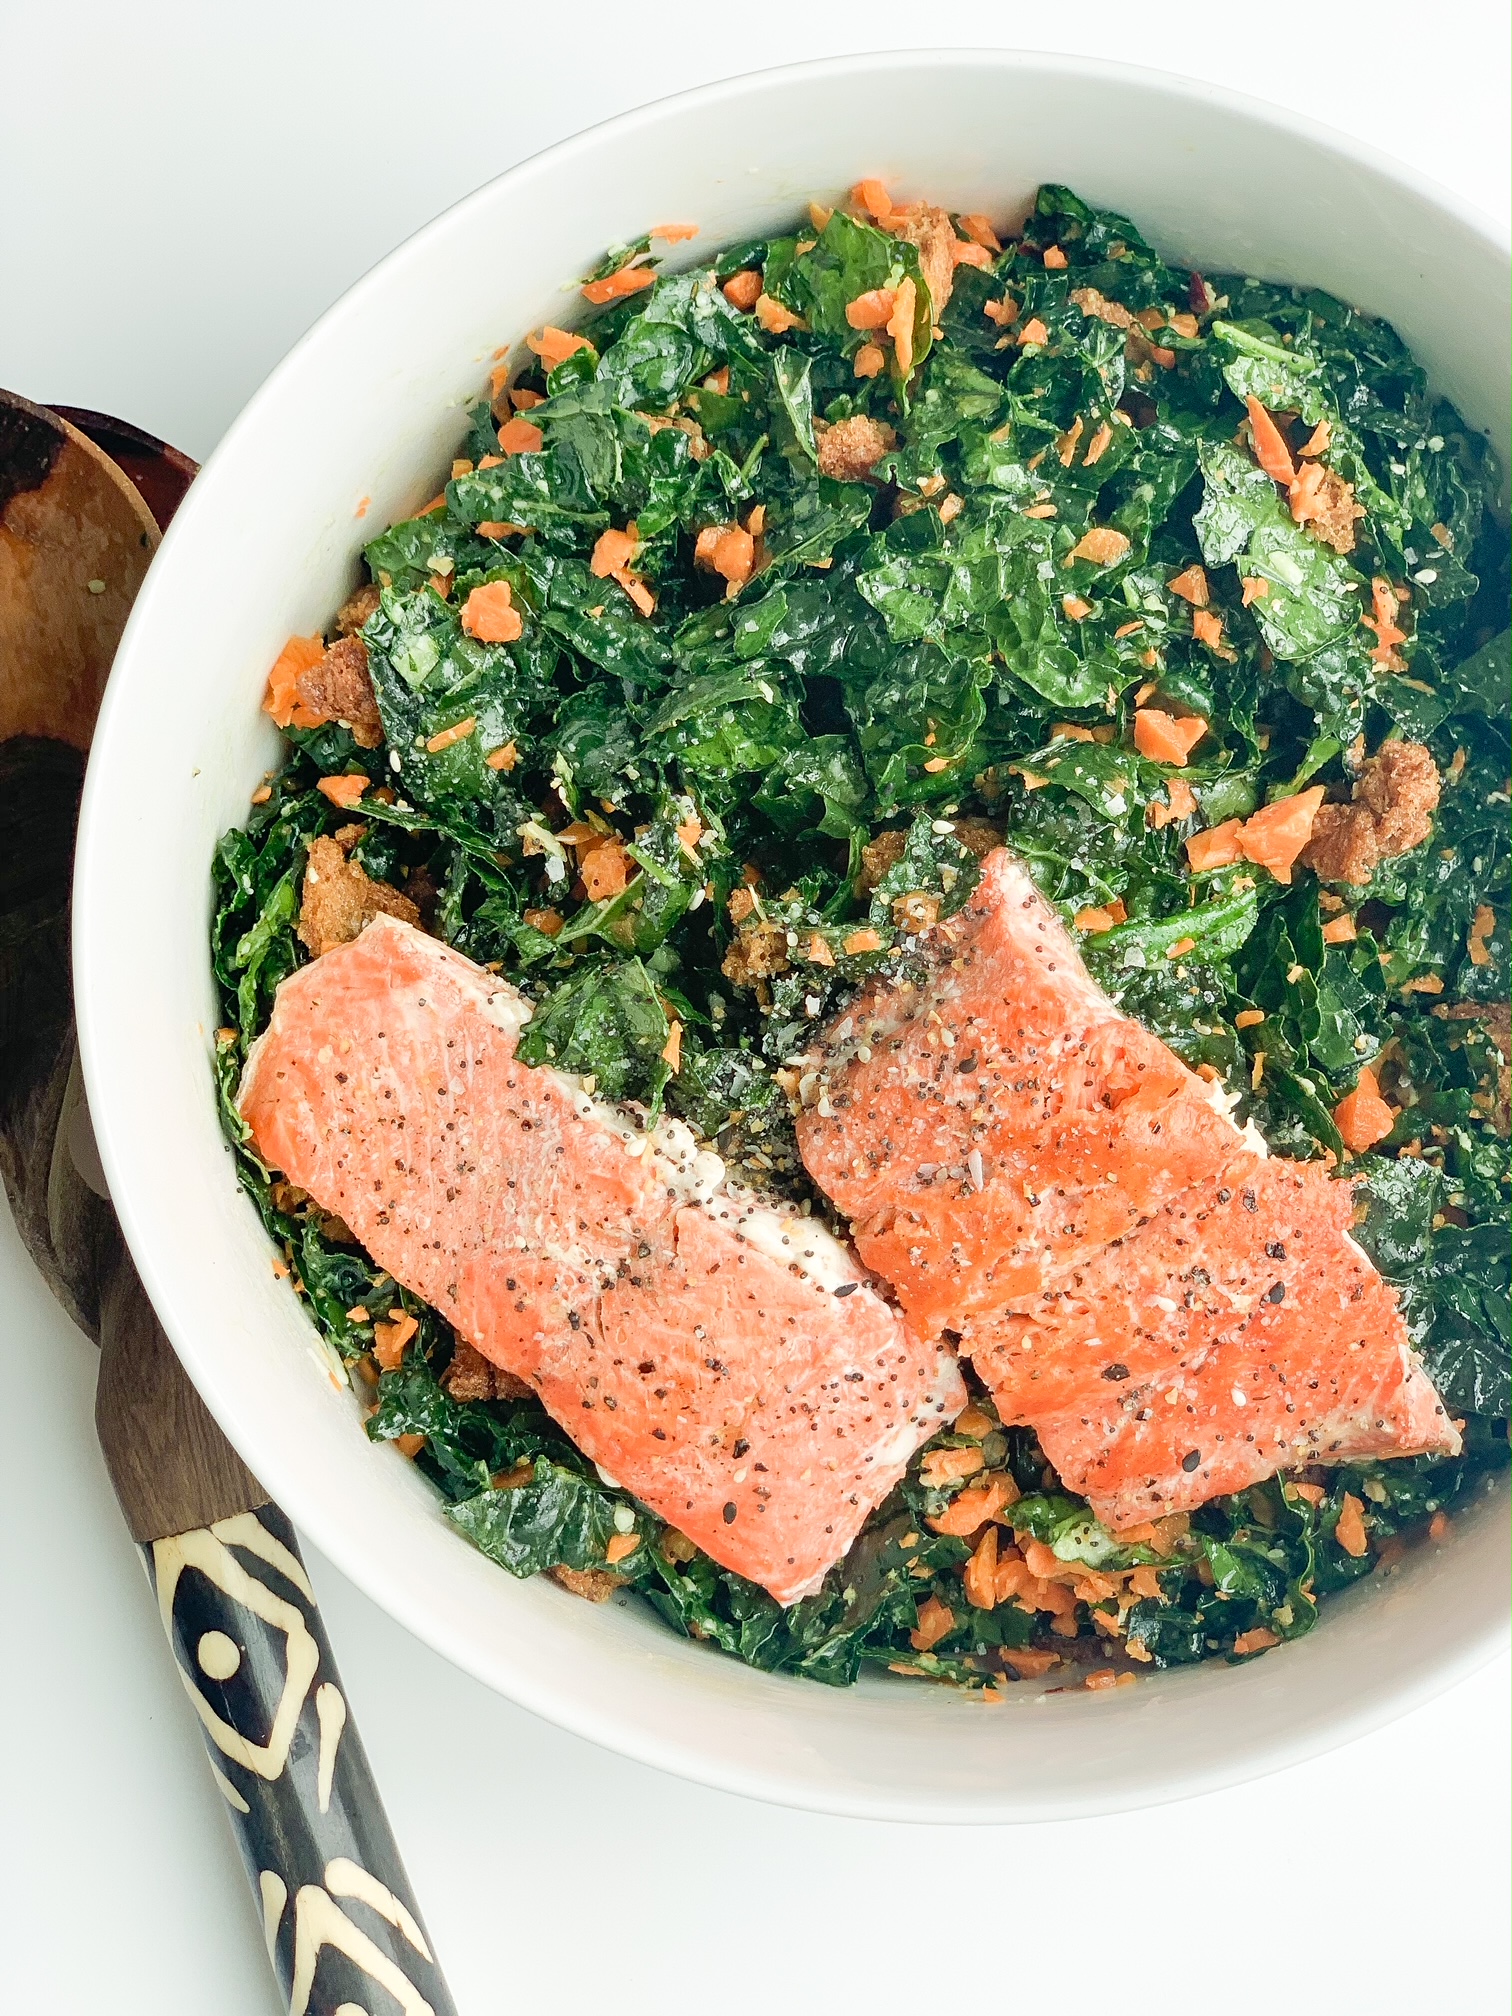 This gut healing kale and salmon caesar salad is a recipe you will use time and time again!